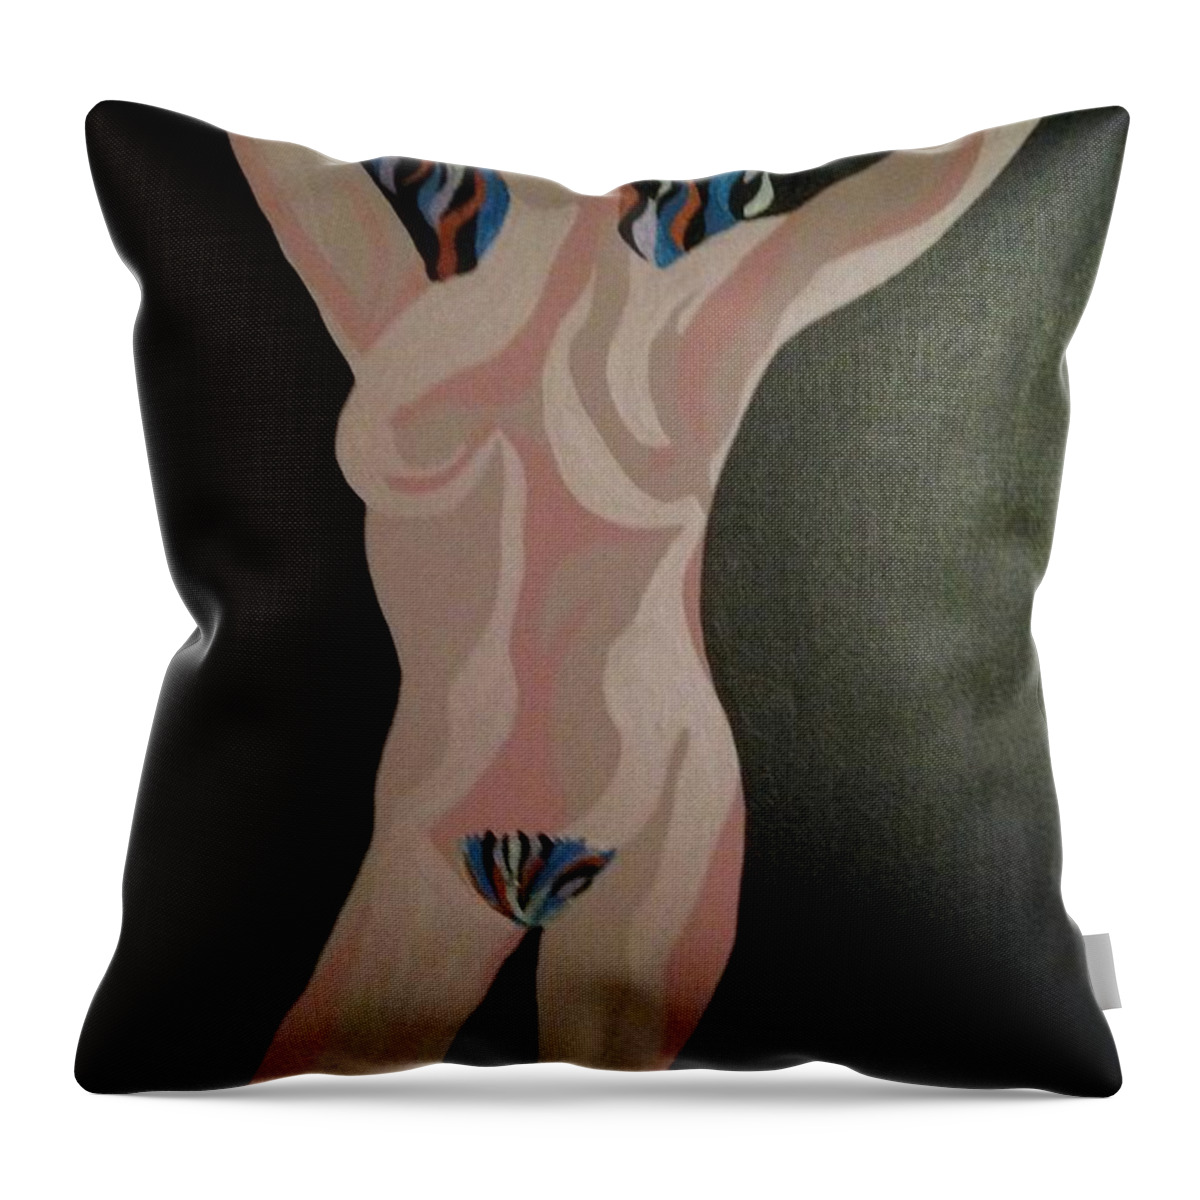 Hair Throw Pillow featuring the painting Medusa by Erika Jean Chamberlin